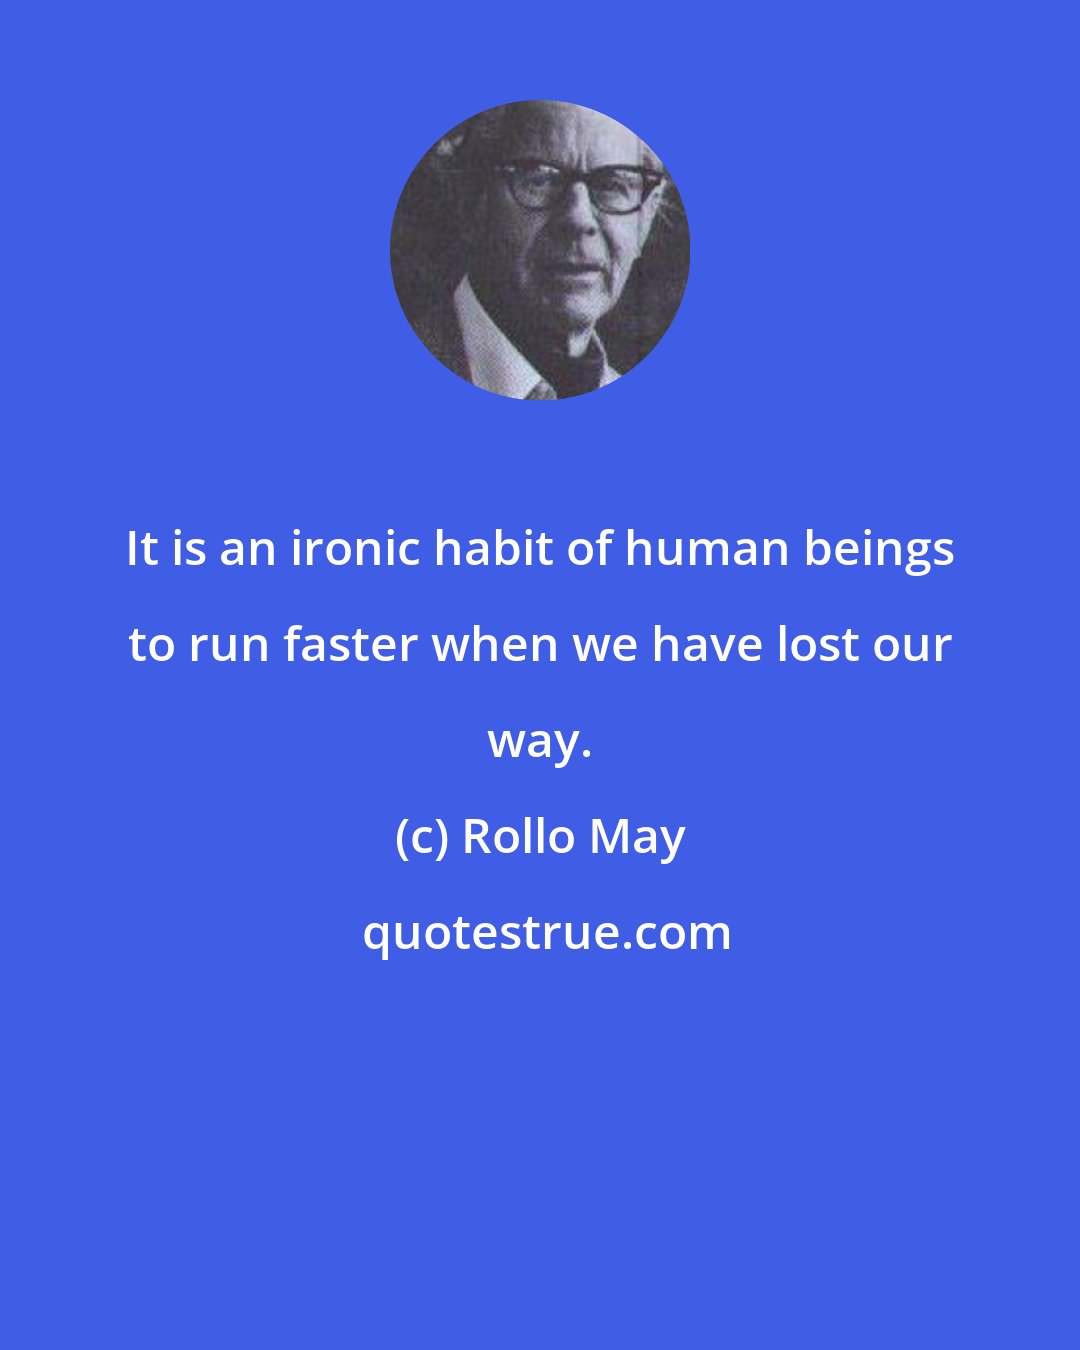 Rollo May: It is an ironic habit of human beings to run faster when we have lost our way.